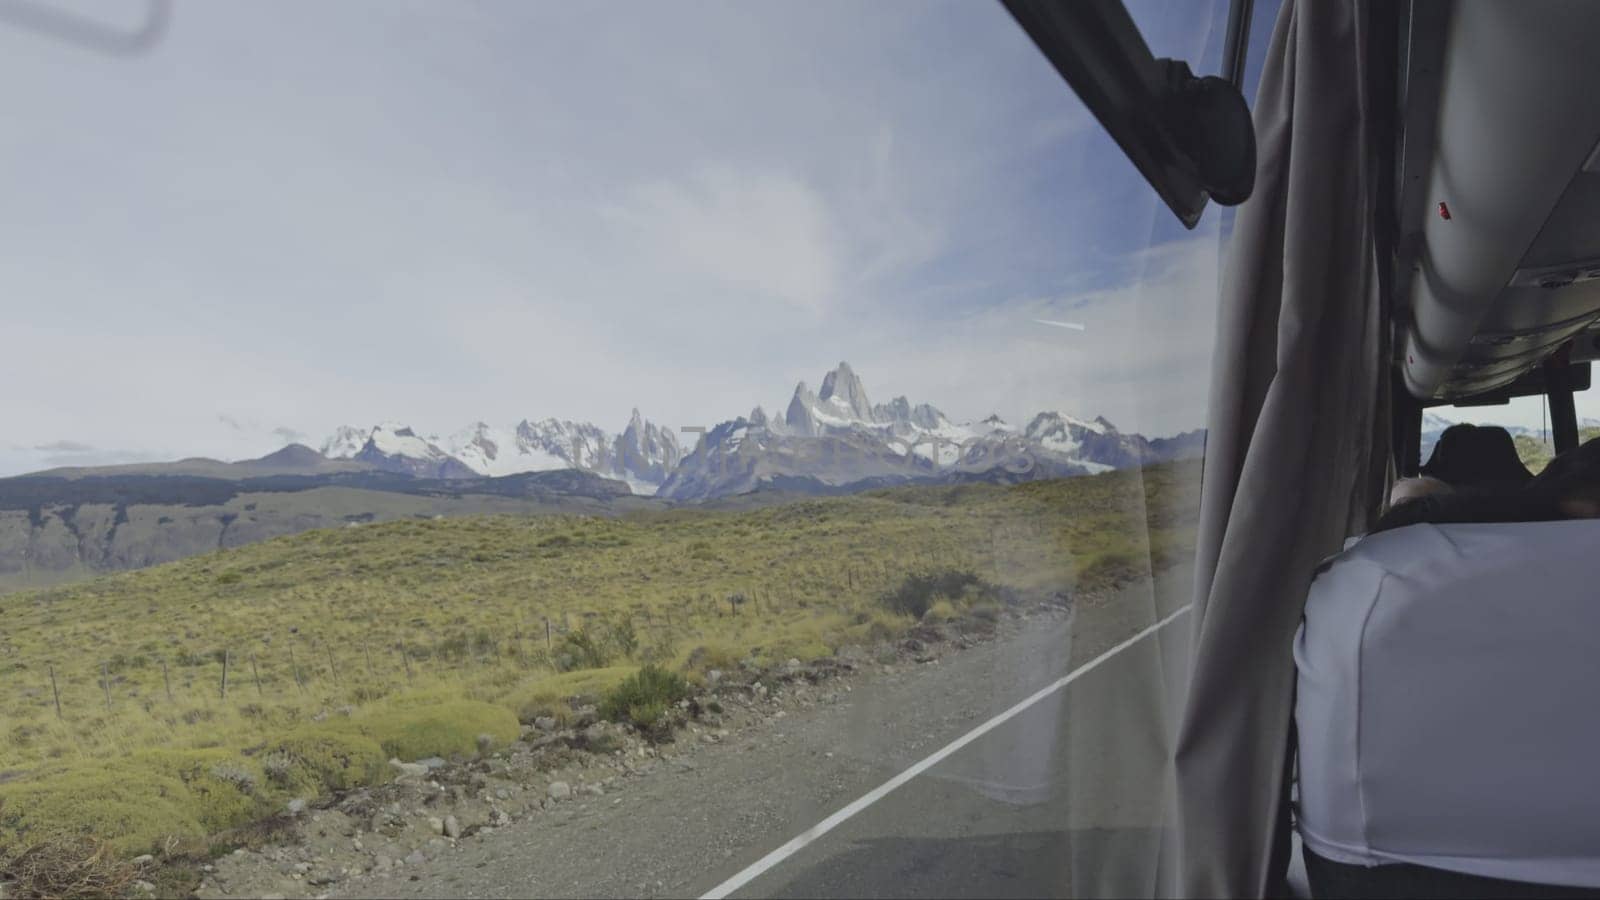 Scenic Mountain View Through a Bus Window on a Trip by FerradalFCG